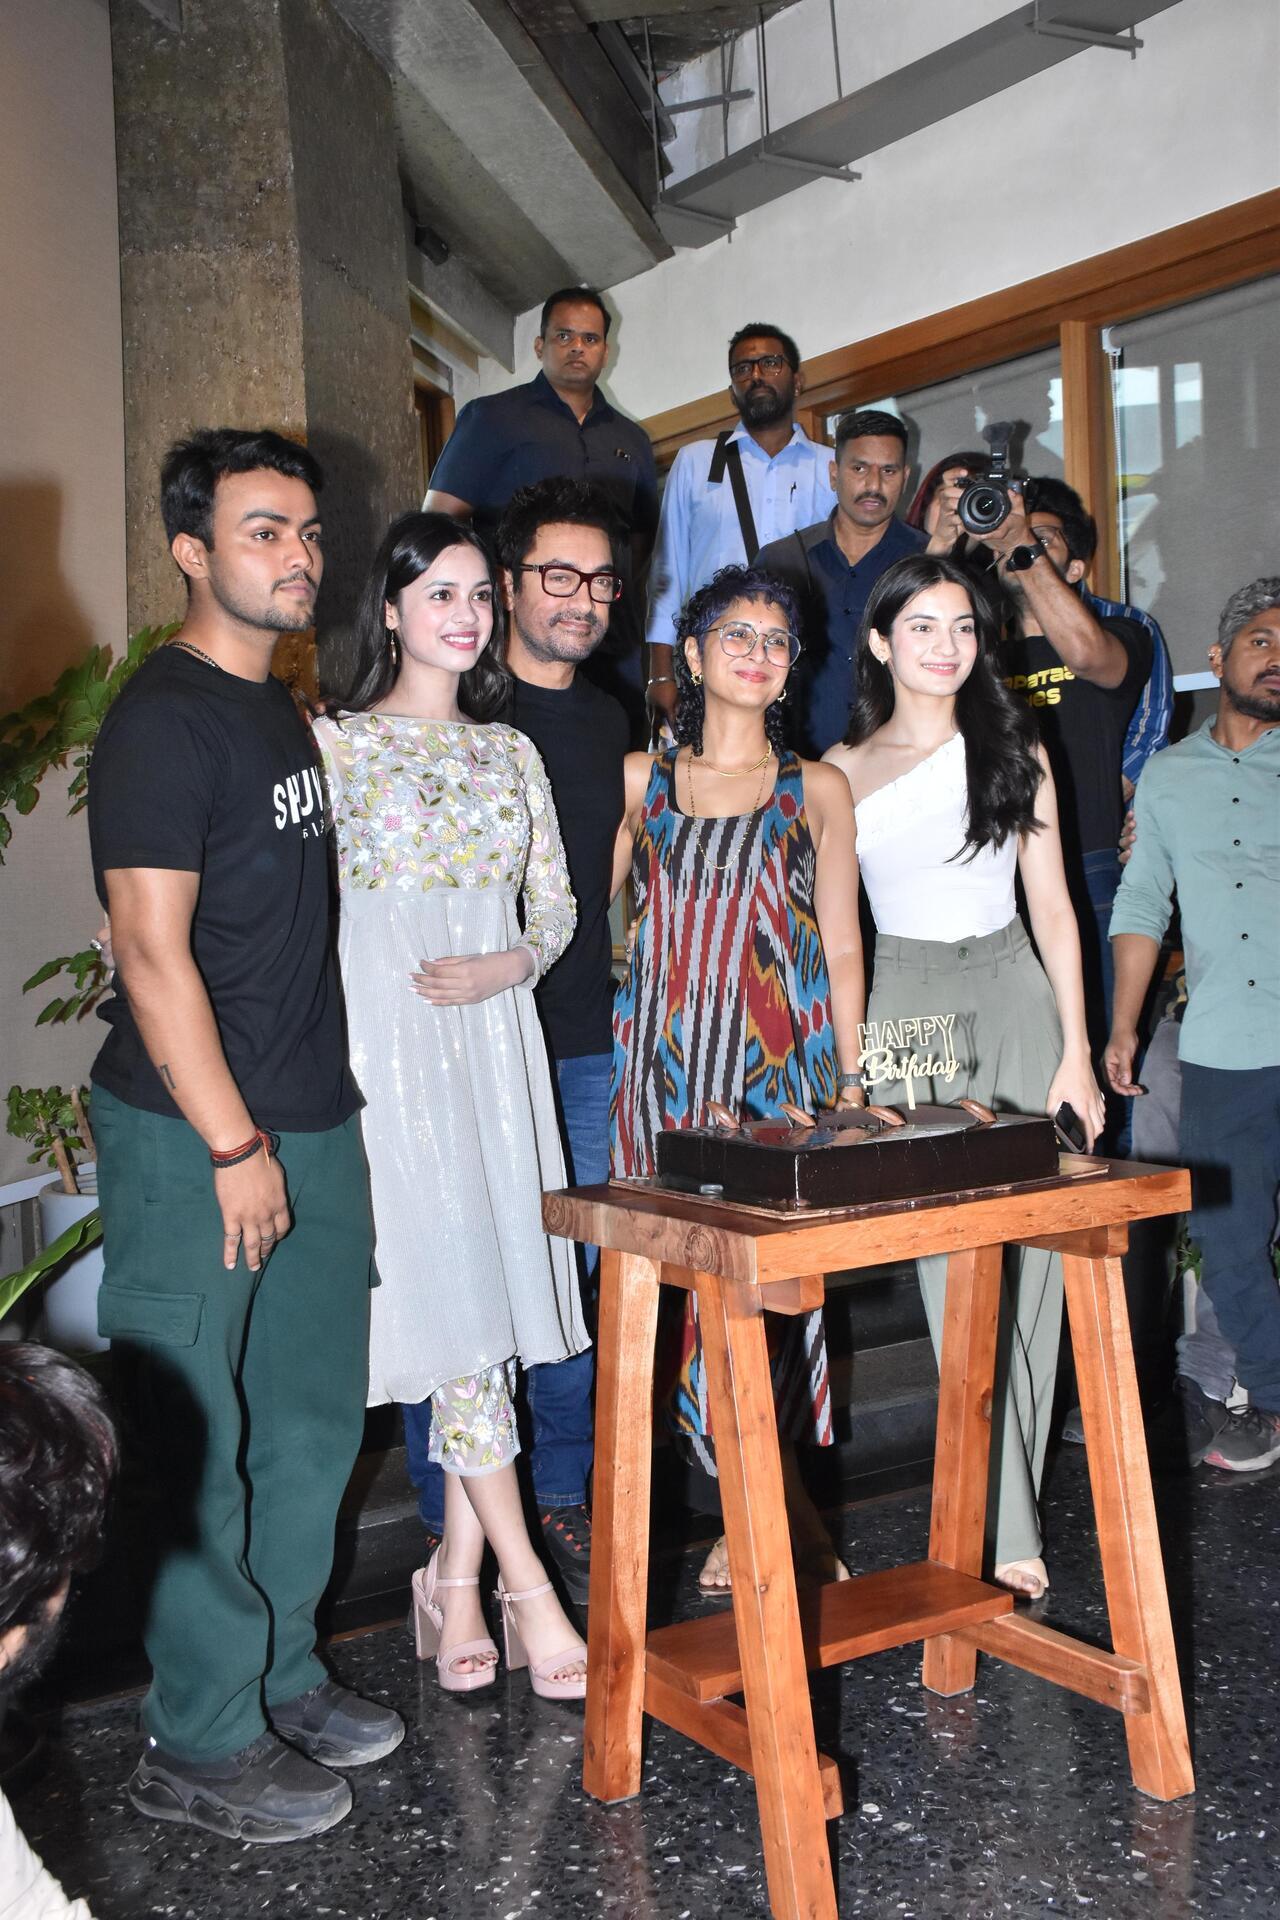 Aamir Khan was accompanied by the team of Laapataa Ladies for his birthday celebrations including ex-wife Kiran Rao